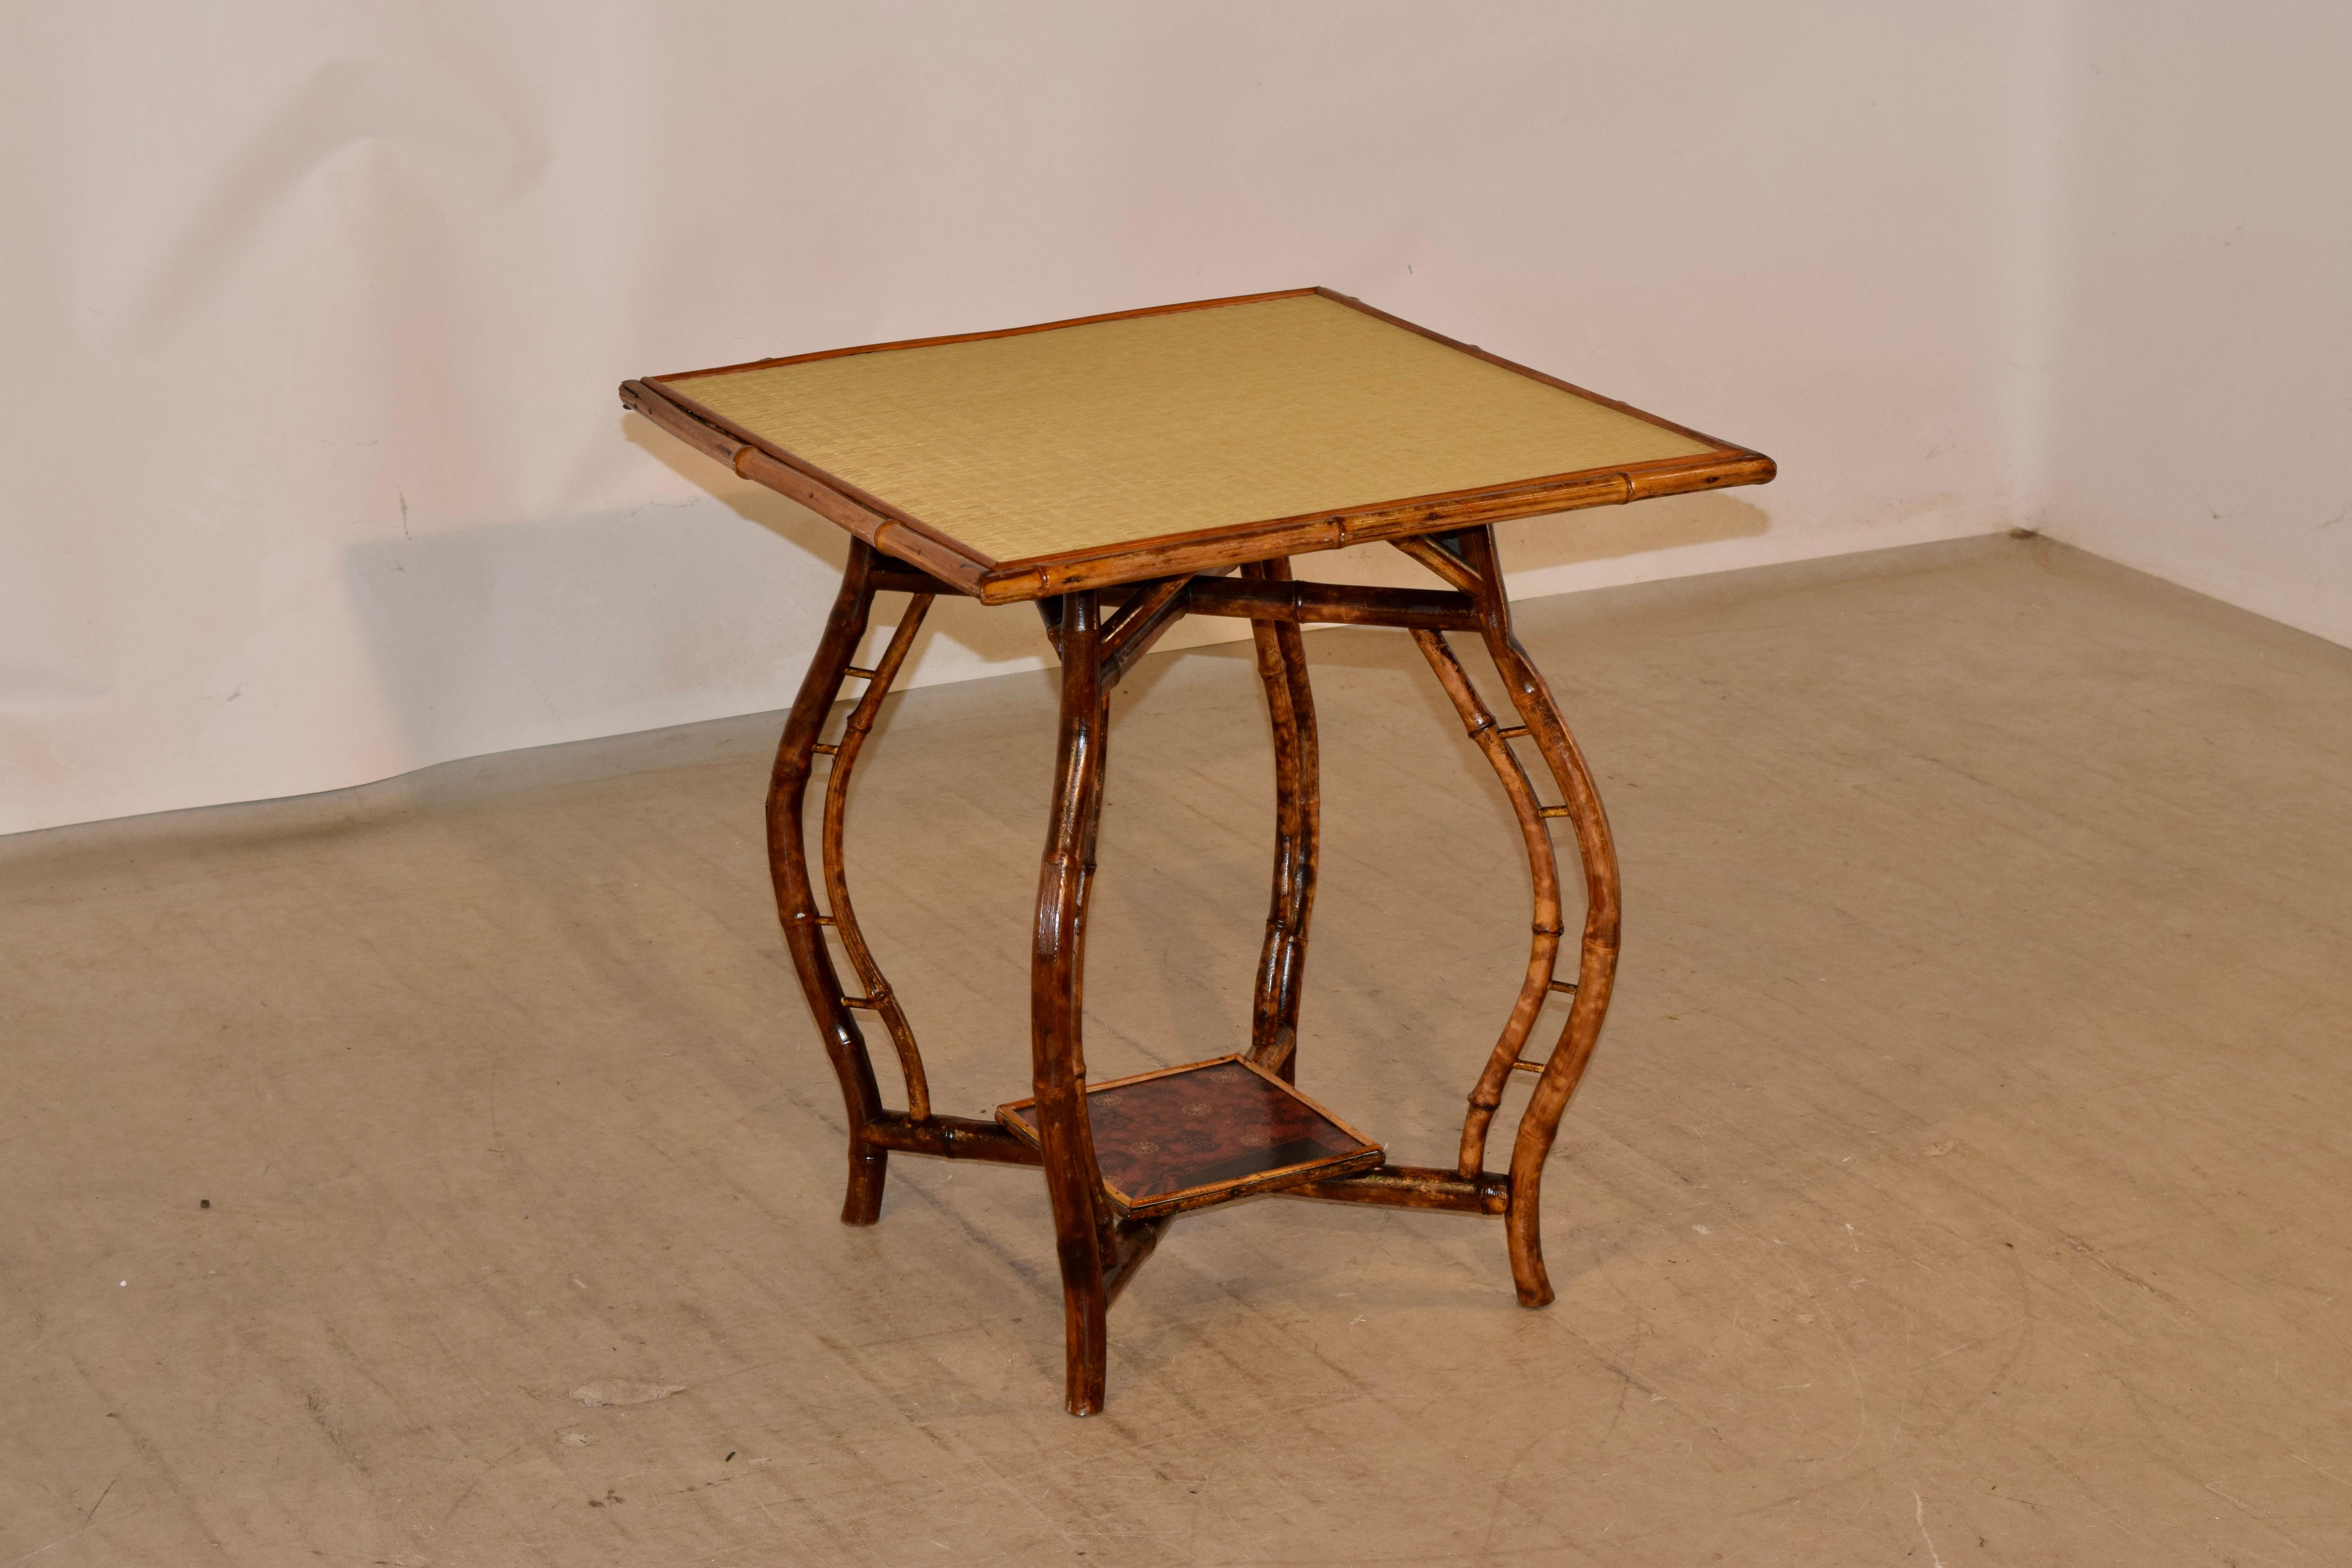 19th century French bamboo table with wonderful Art Nouveau period style. The top has been restored with new rush, and is supported on top of a wonderful frame with exceptional double cabriole legs, joined at the bottom by stretchers and a small